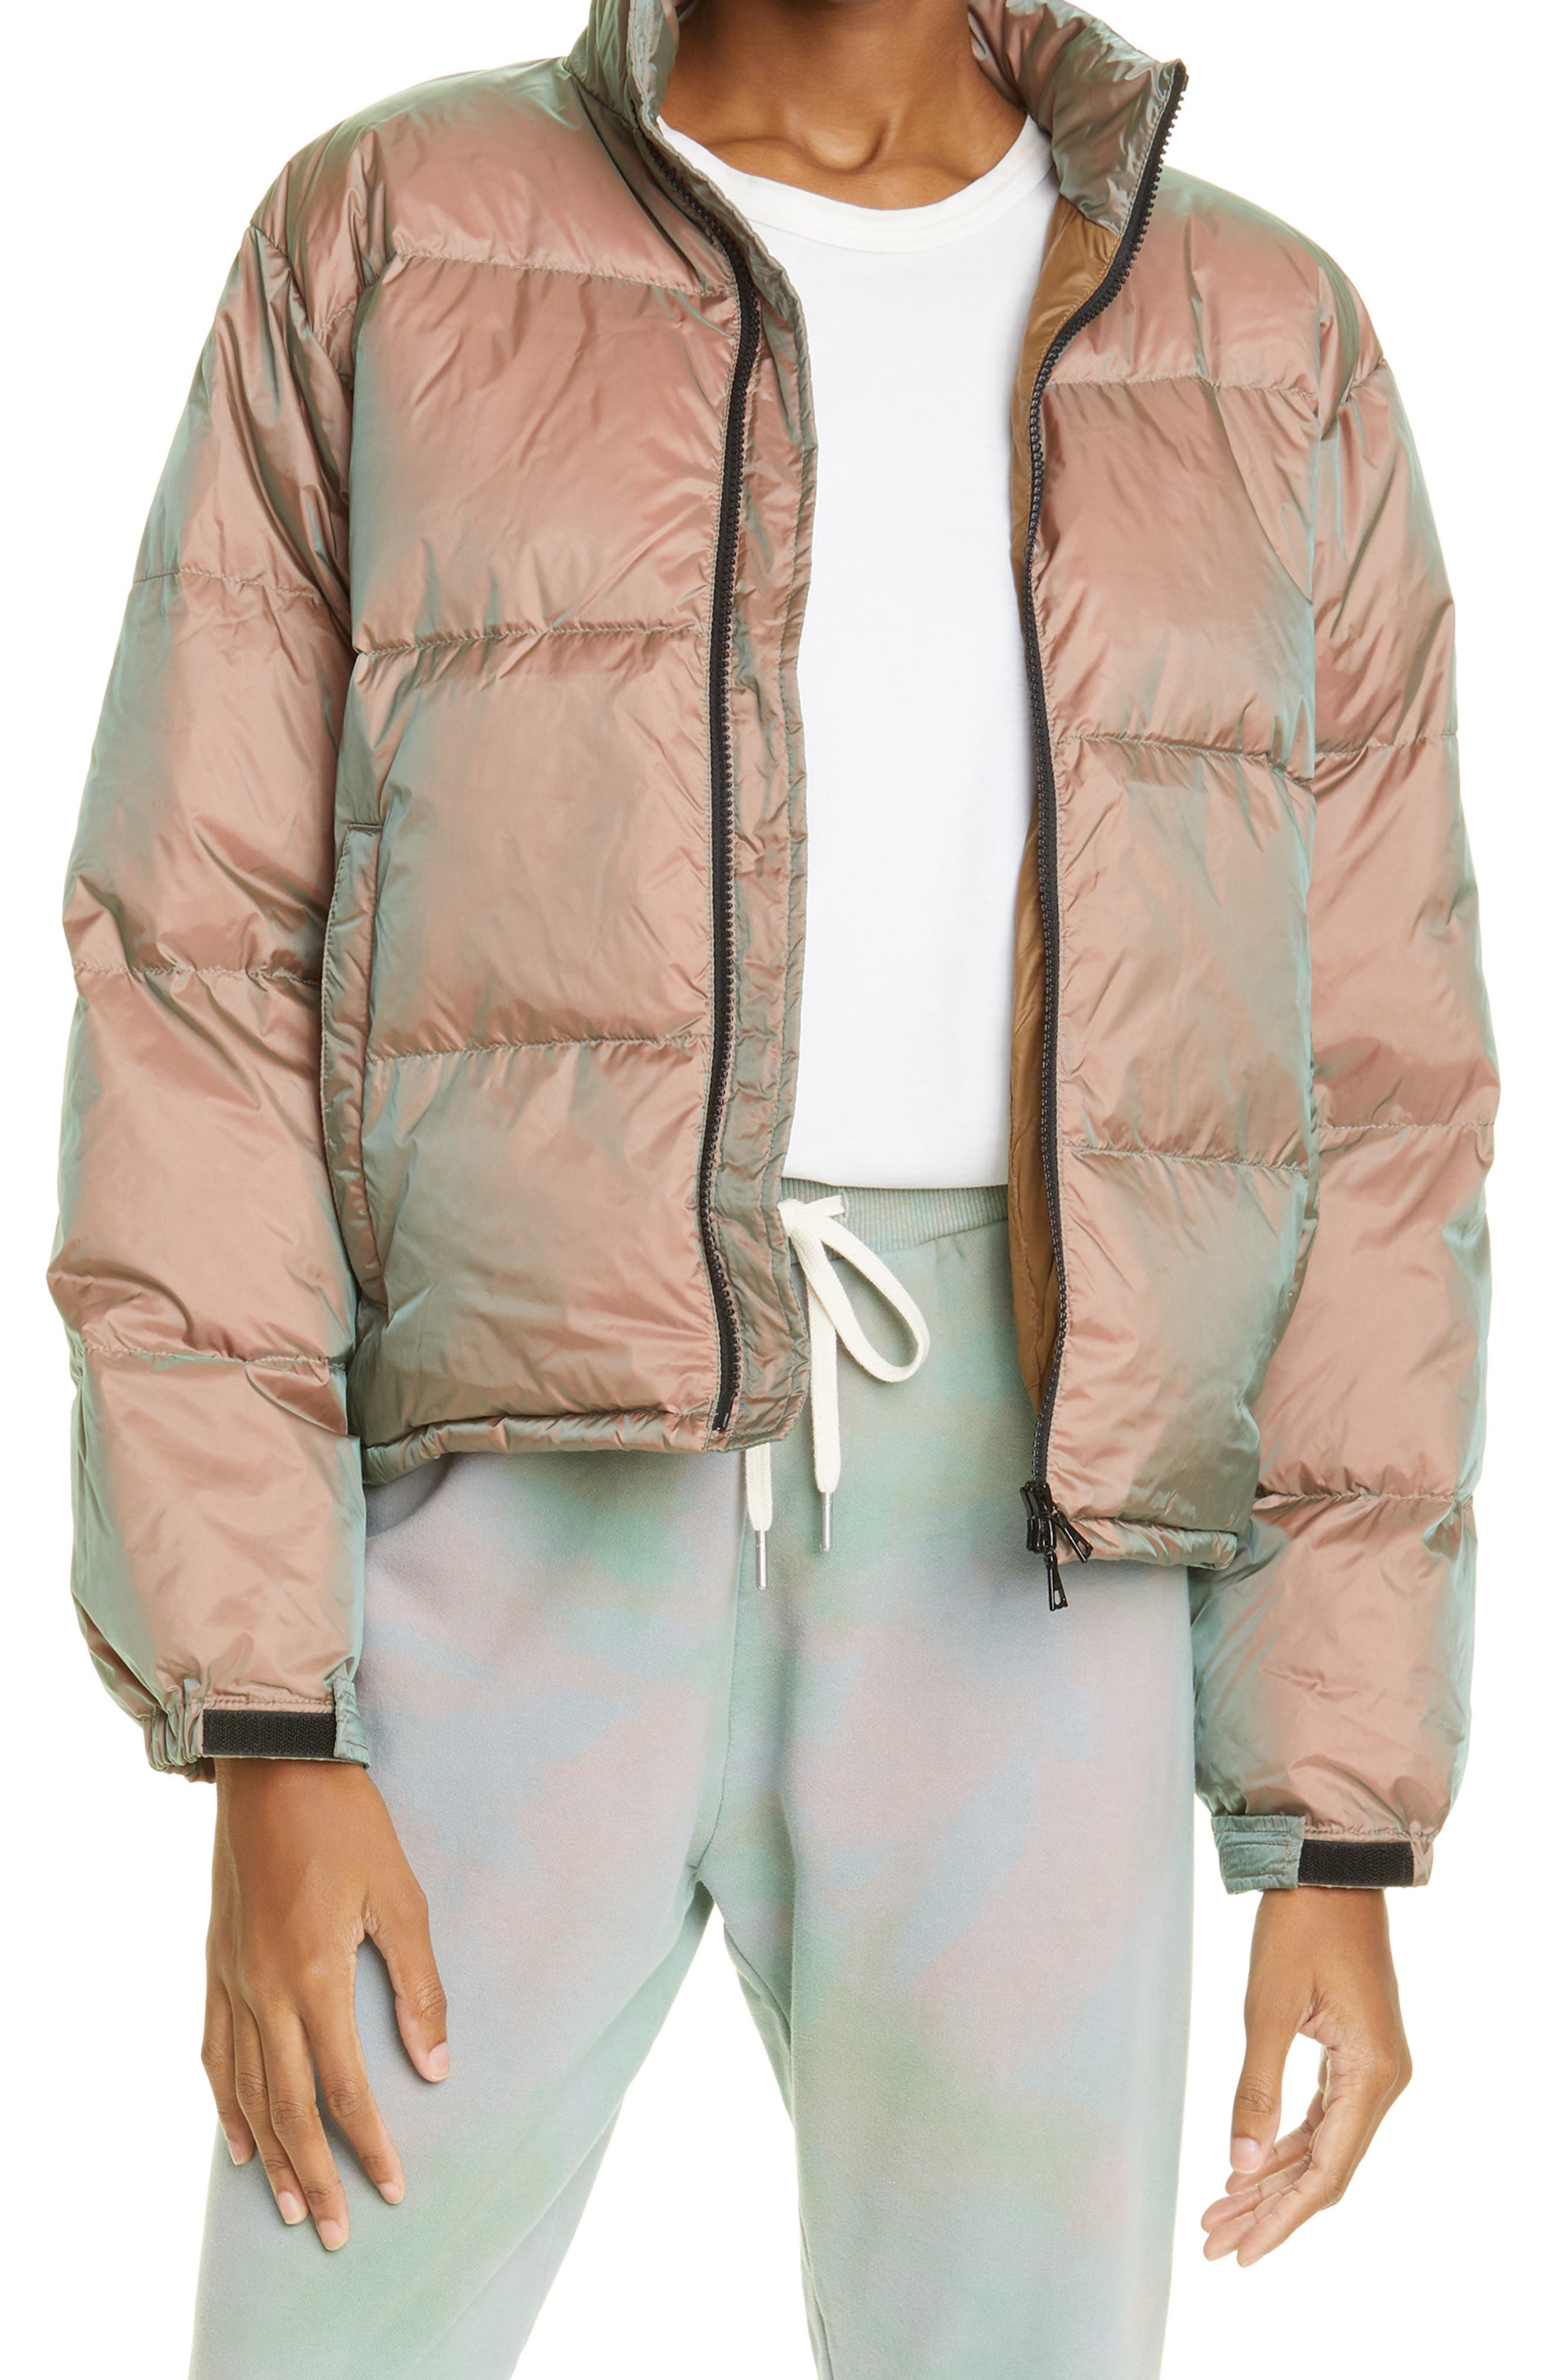 John Elliott Iridescent Down Puffer Jacket in Astral at Nordstrom, Size Large